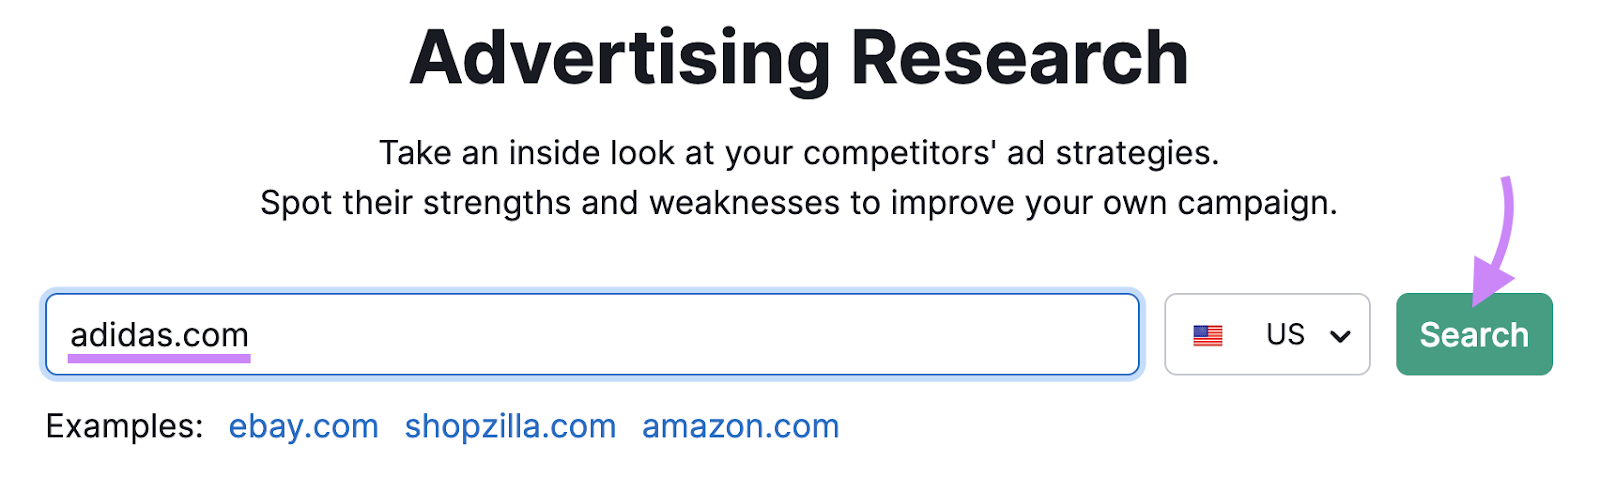 "adidas.com" entered into Advertising Research tool search bar